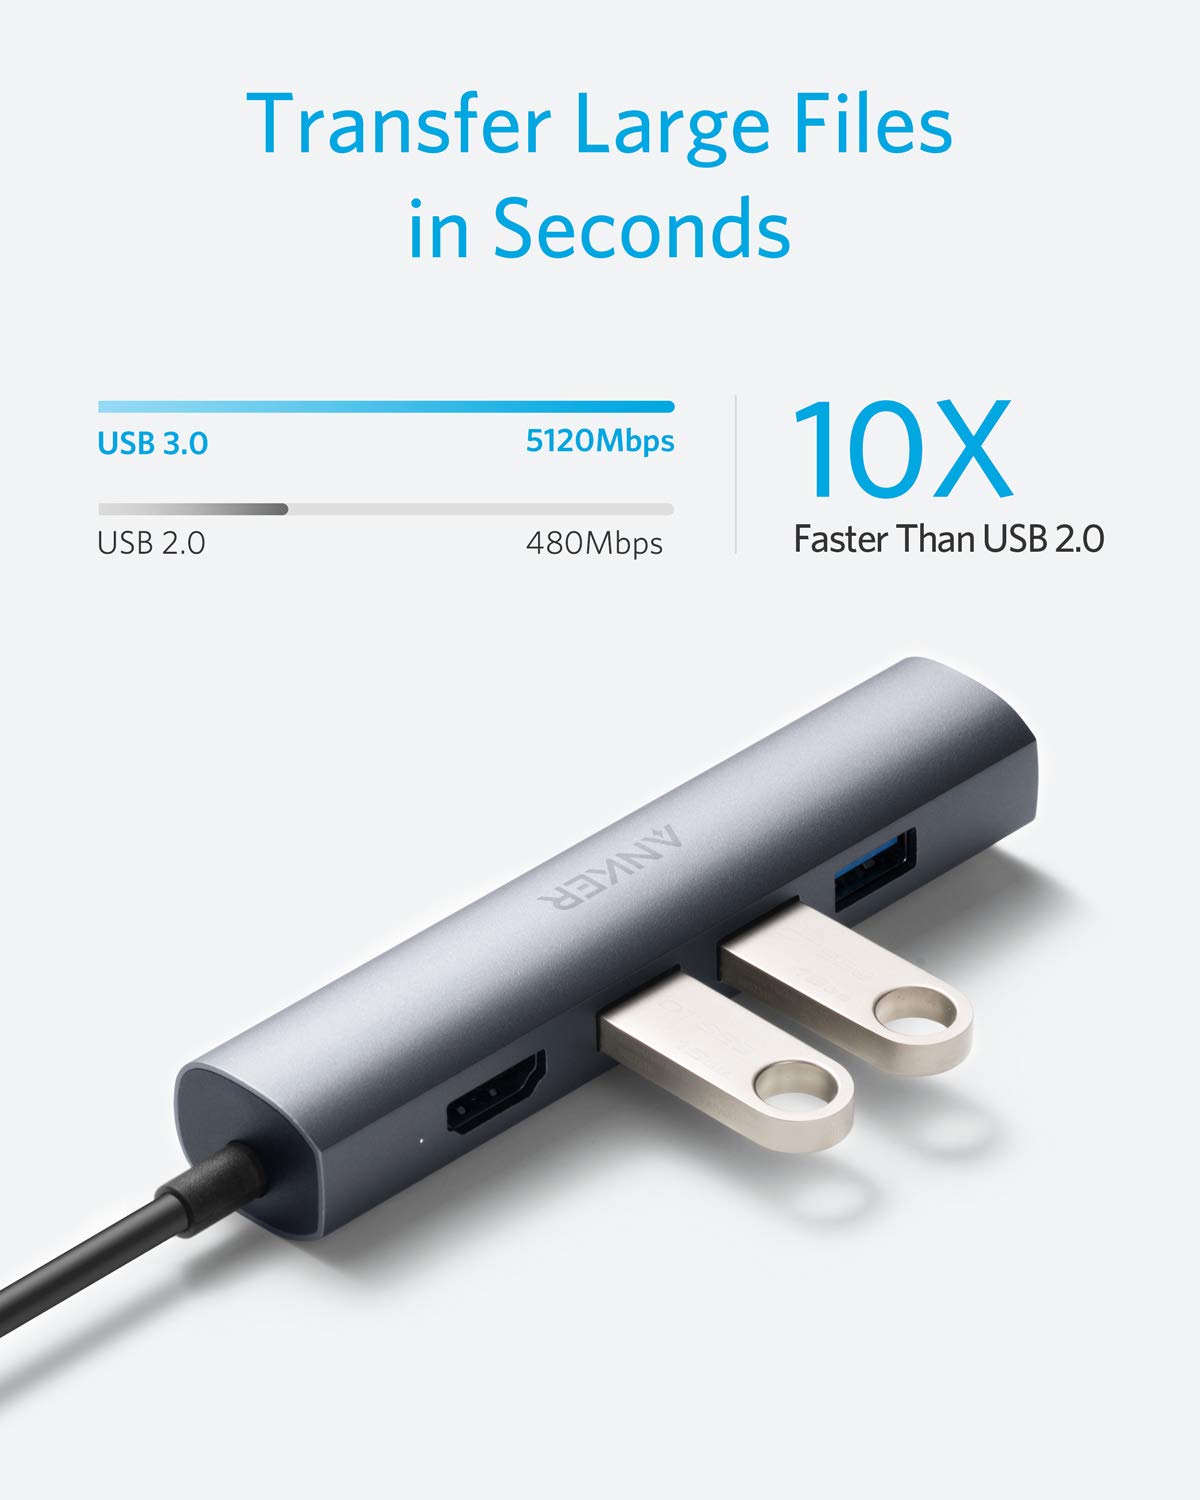 Anker 5-in-1 USB-C Hub On Sale for 35% Off [Deal]